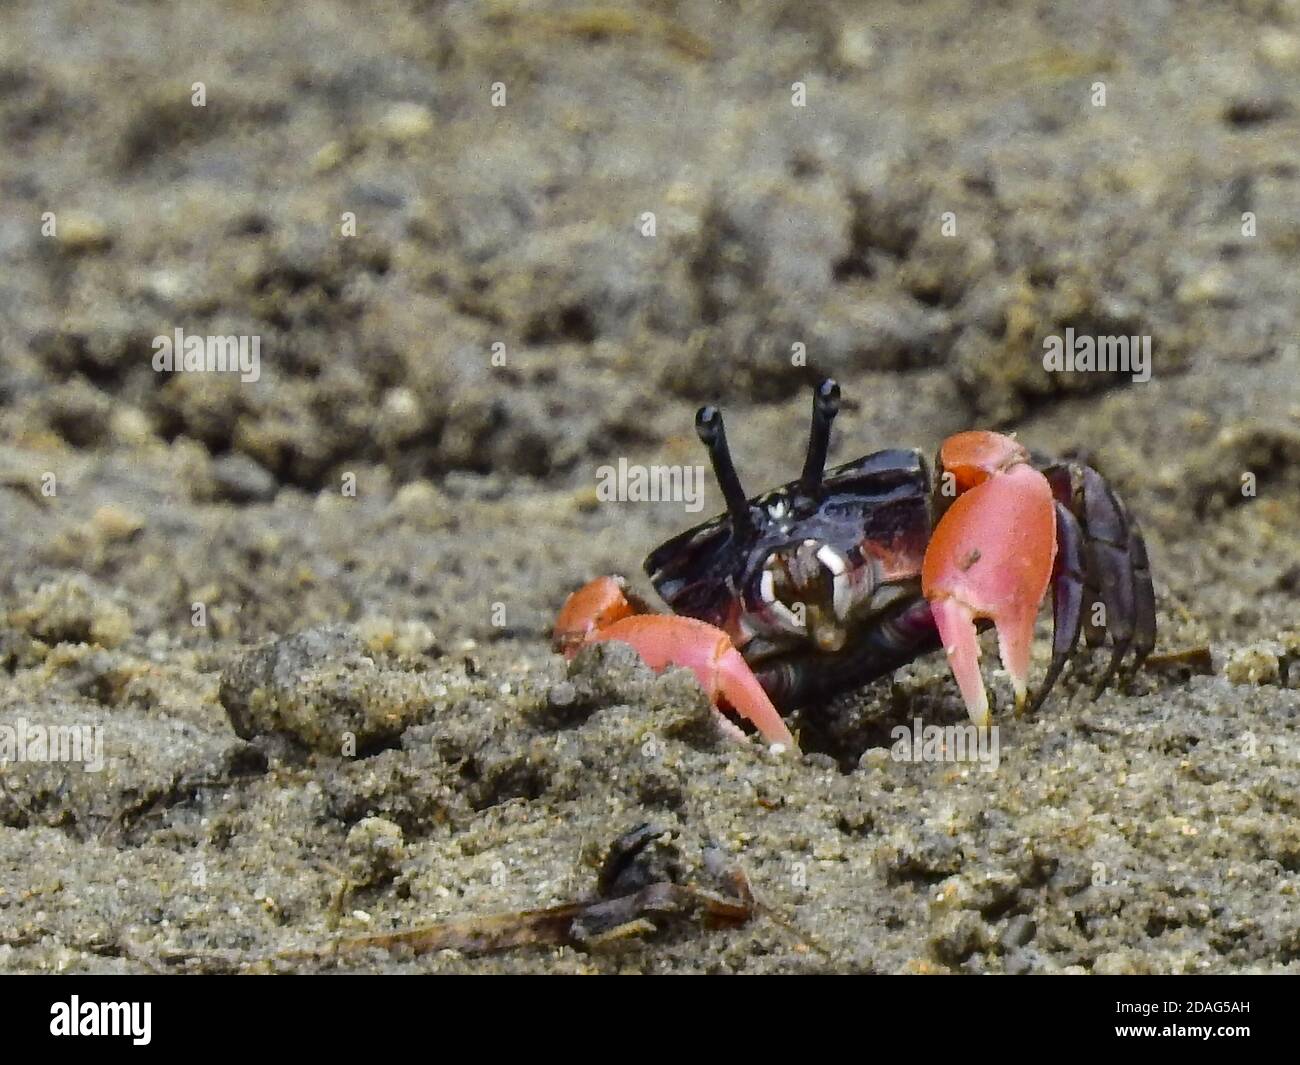 Closeup of a red-clawed fiddler crab on the wet sand Stock Photo